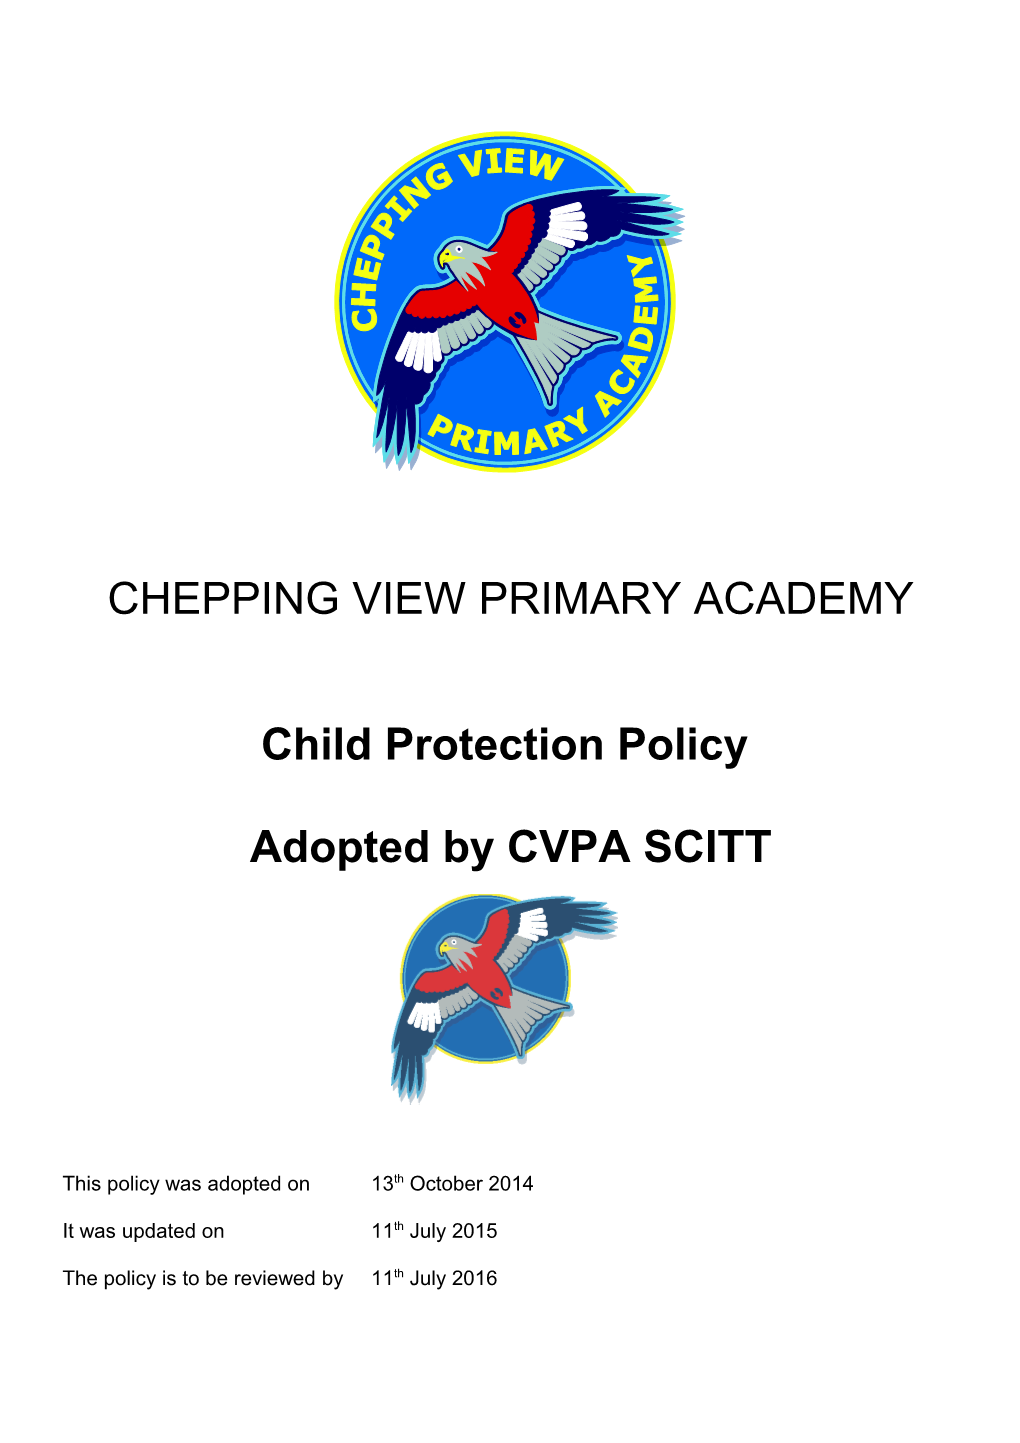 Chepping View Primary Academy